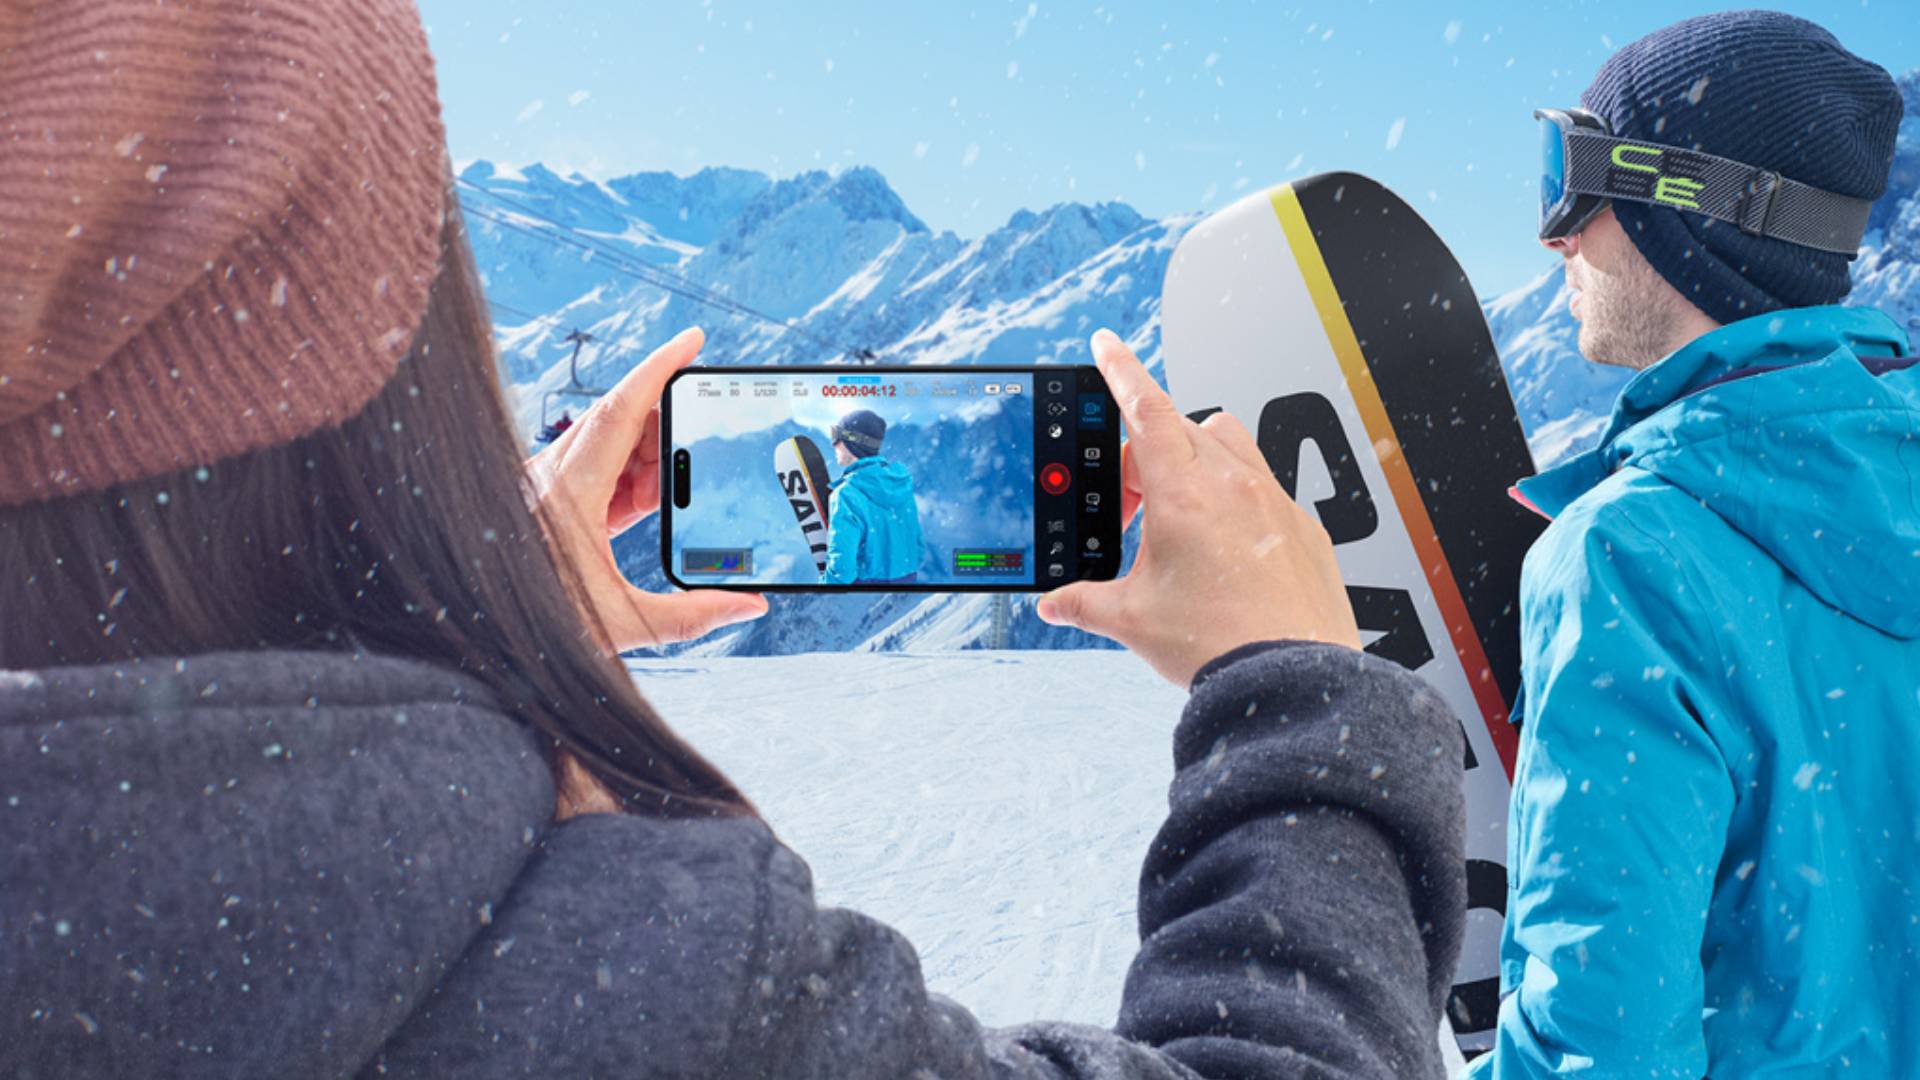 Person filming a snowboarderusing the Blackmagic Camera app on a smartphone with mountains in the background.